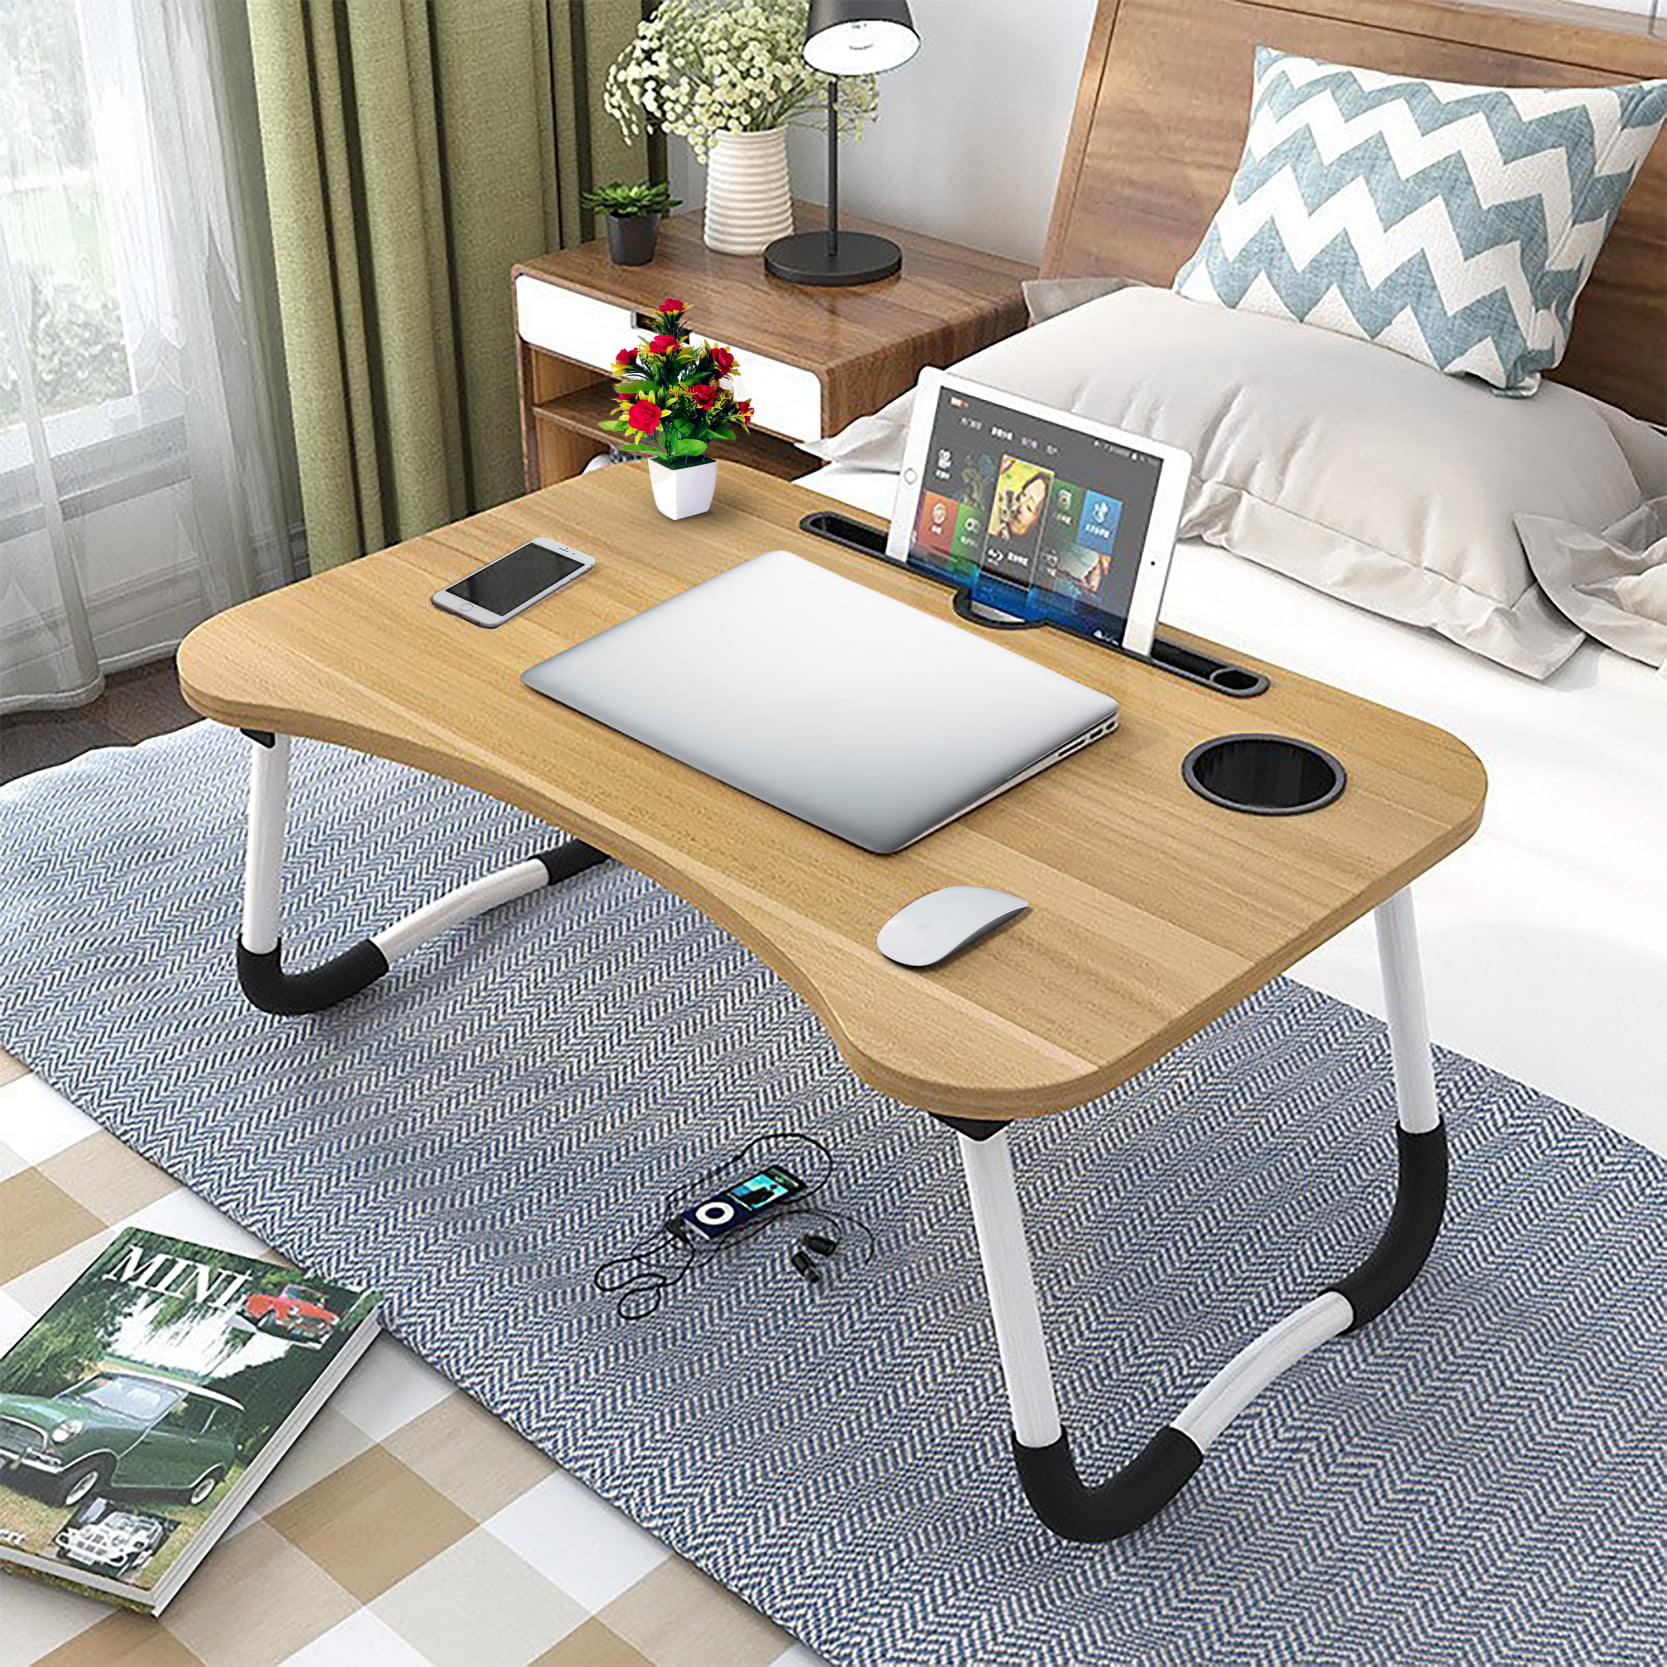 Portable foldable home laptop/notebook stand desk/table/laptop table for Studies-Wood